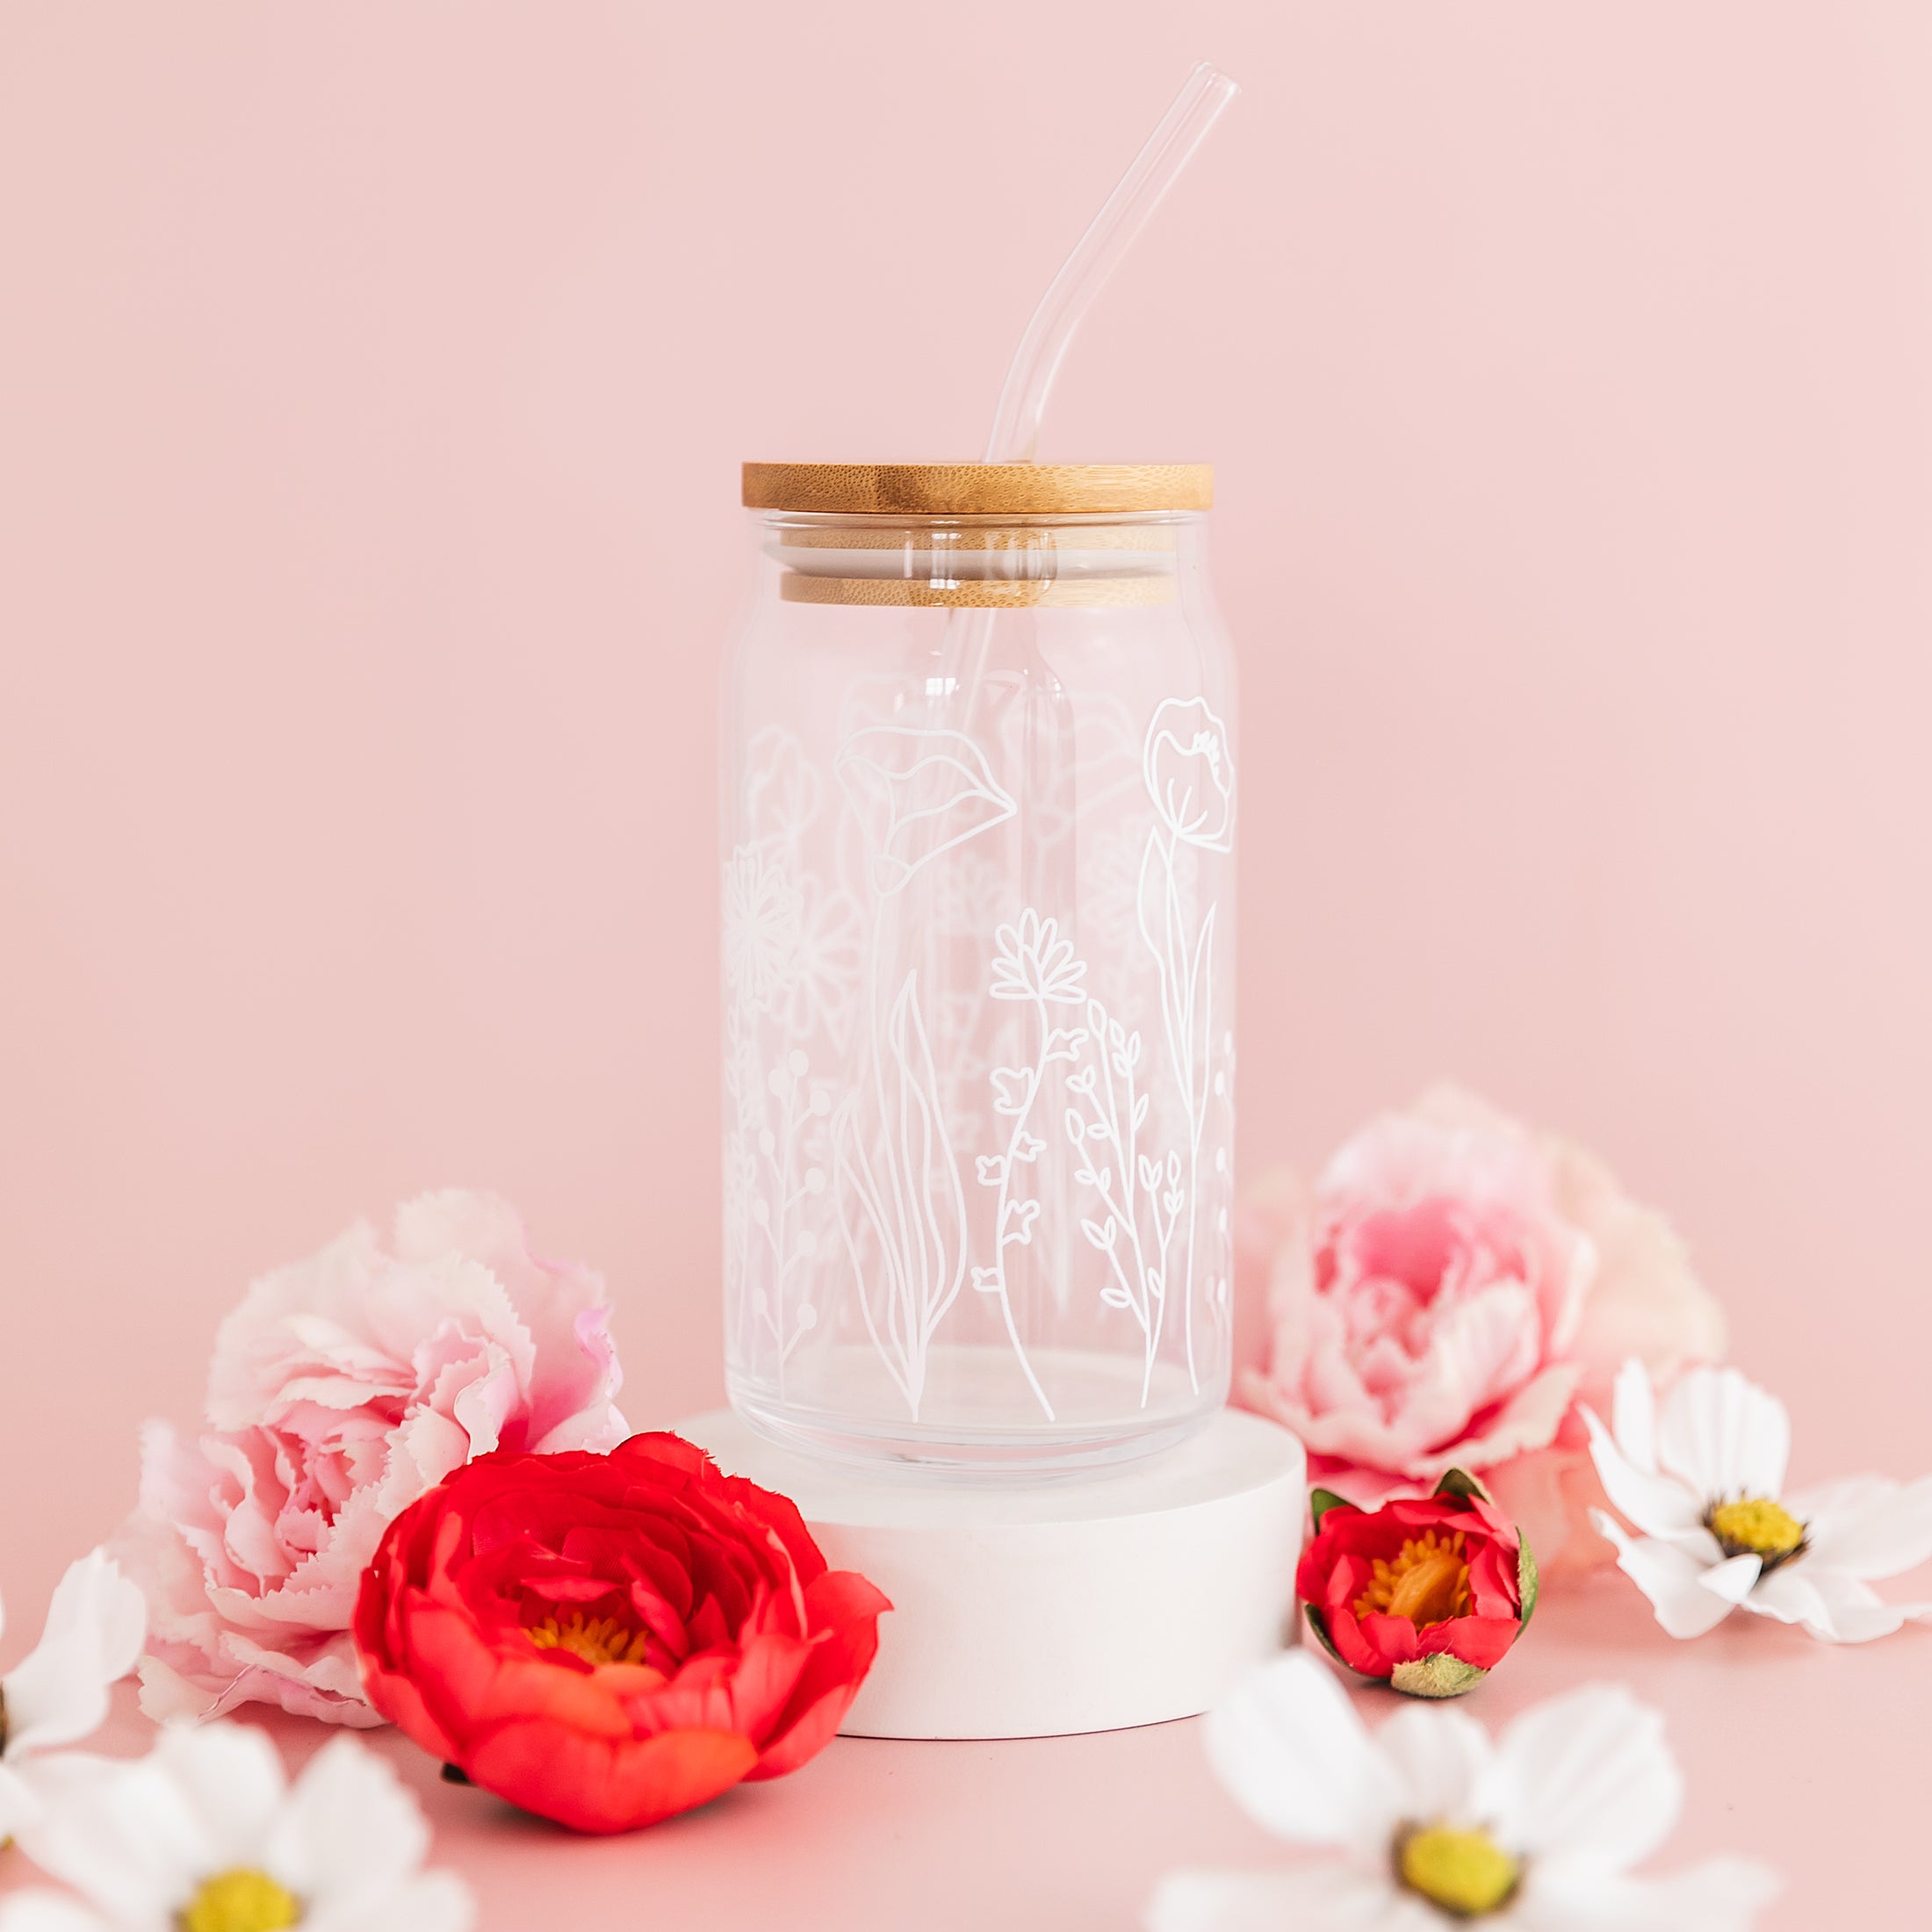 a glass jar with a straw and a flower on a pink background